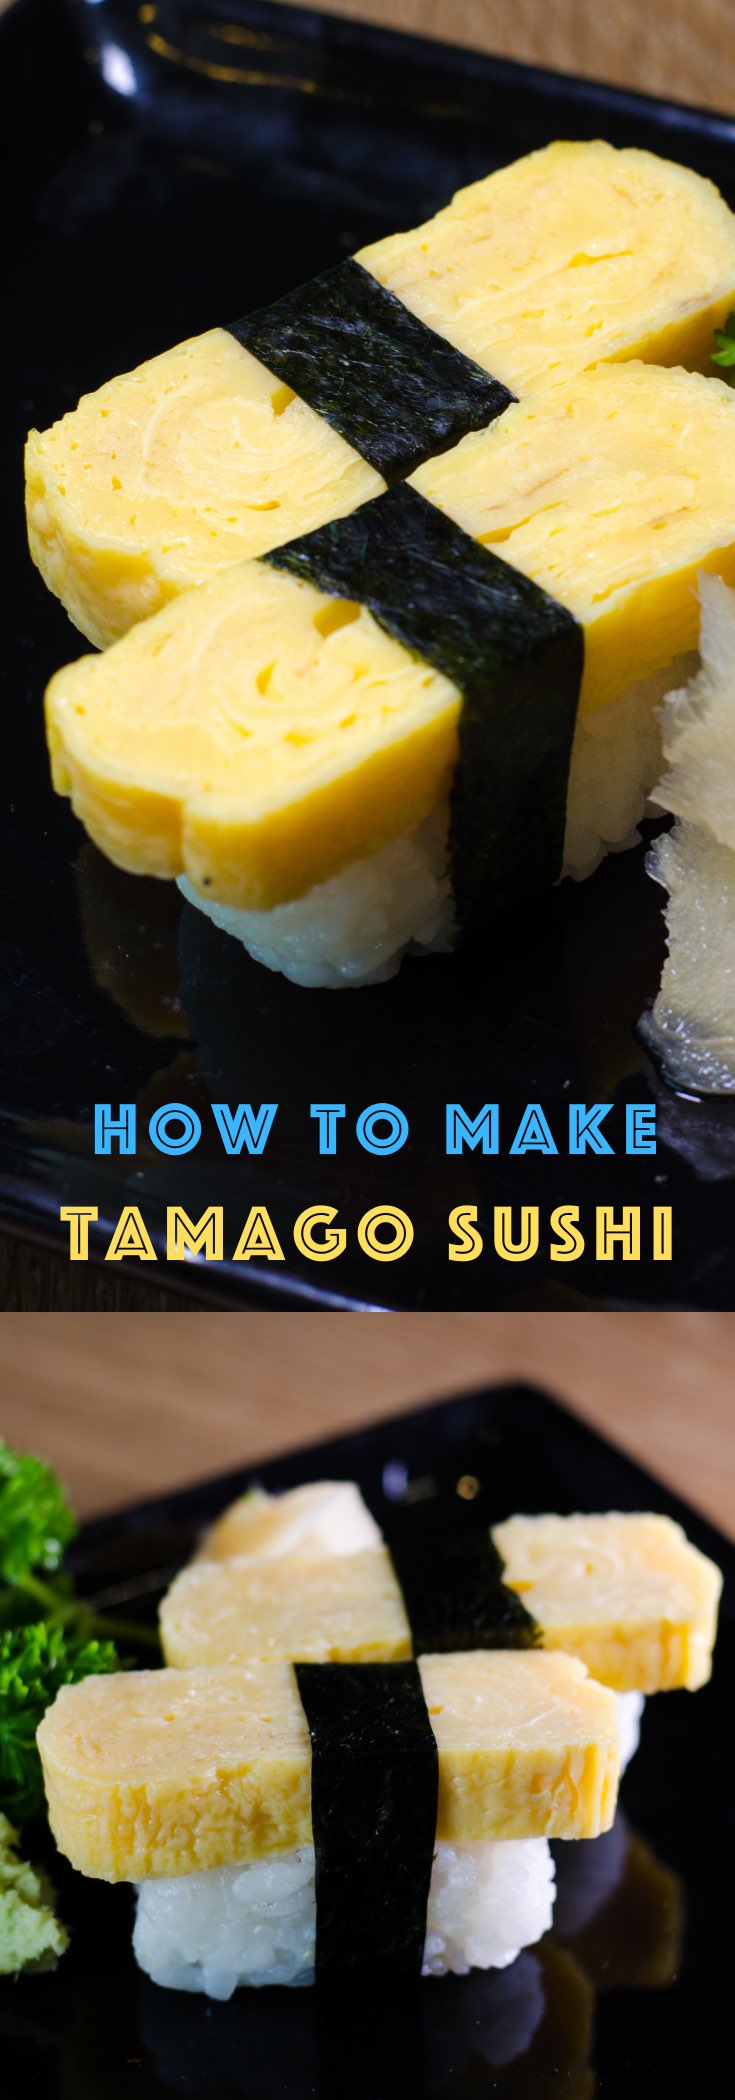 Tamago Sushi is sweet and savory, with a light, fluffy texture. It’s made with Japanese rolled omelet (Tamagoyaki) and seasoned sushi rice. This classic egg sushi is a favorite for adults and children alike and is usually served with Japanese breakfasts or as a side dish in a bento box. Tamagoyaki is also delicious when served on top of sushi rice. 